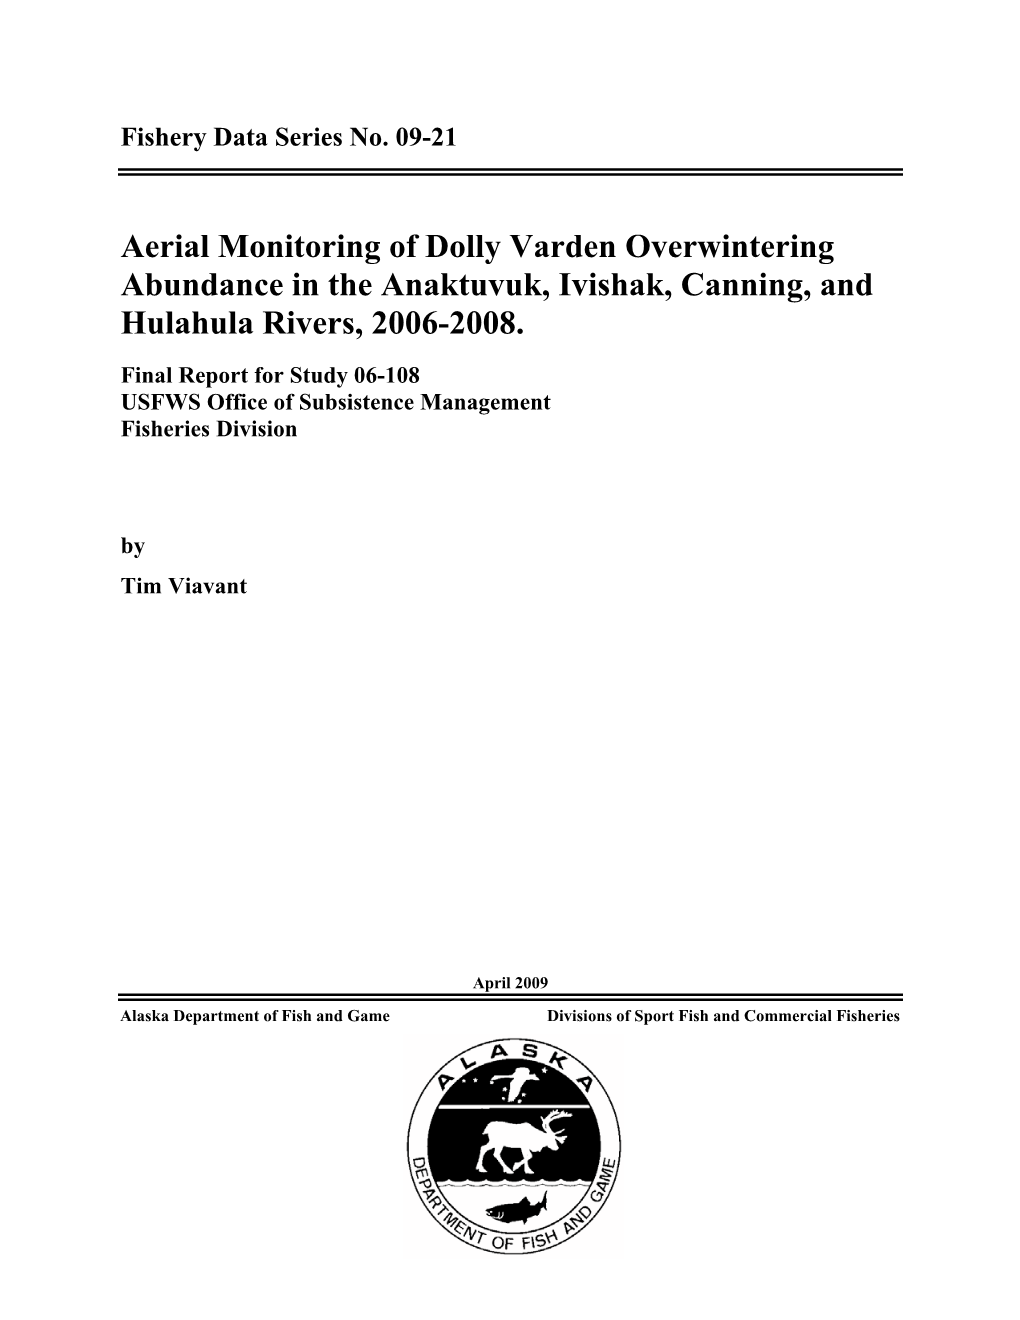 Aerial Monitoring of Dolly Varden Overwintering Abundance in the Anaktuvuk, Ivishak, Canning, and Hulahula Rivers, 2006-2008